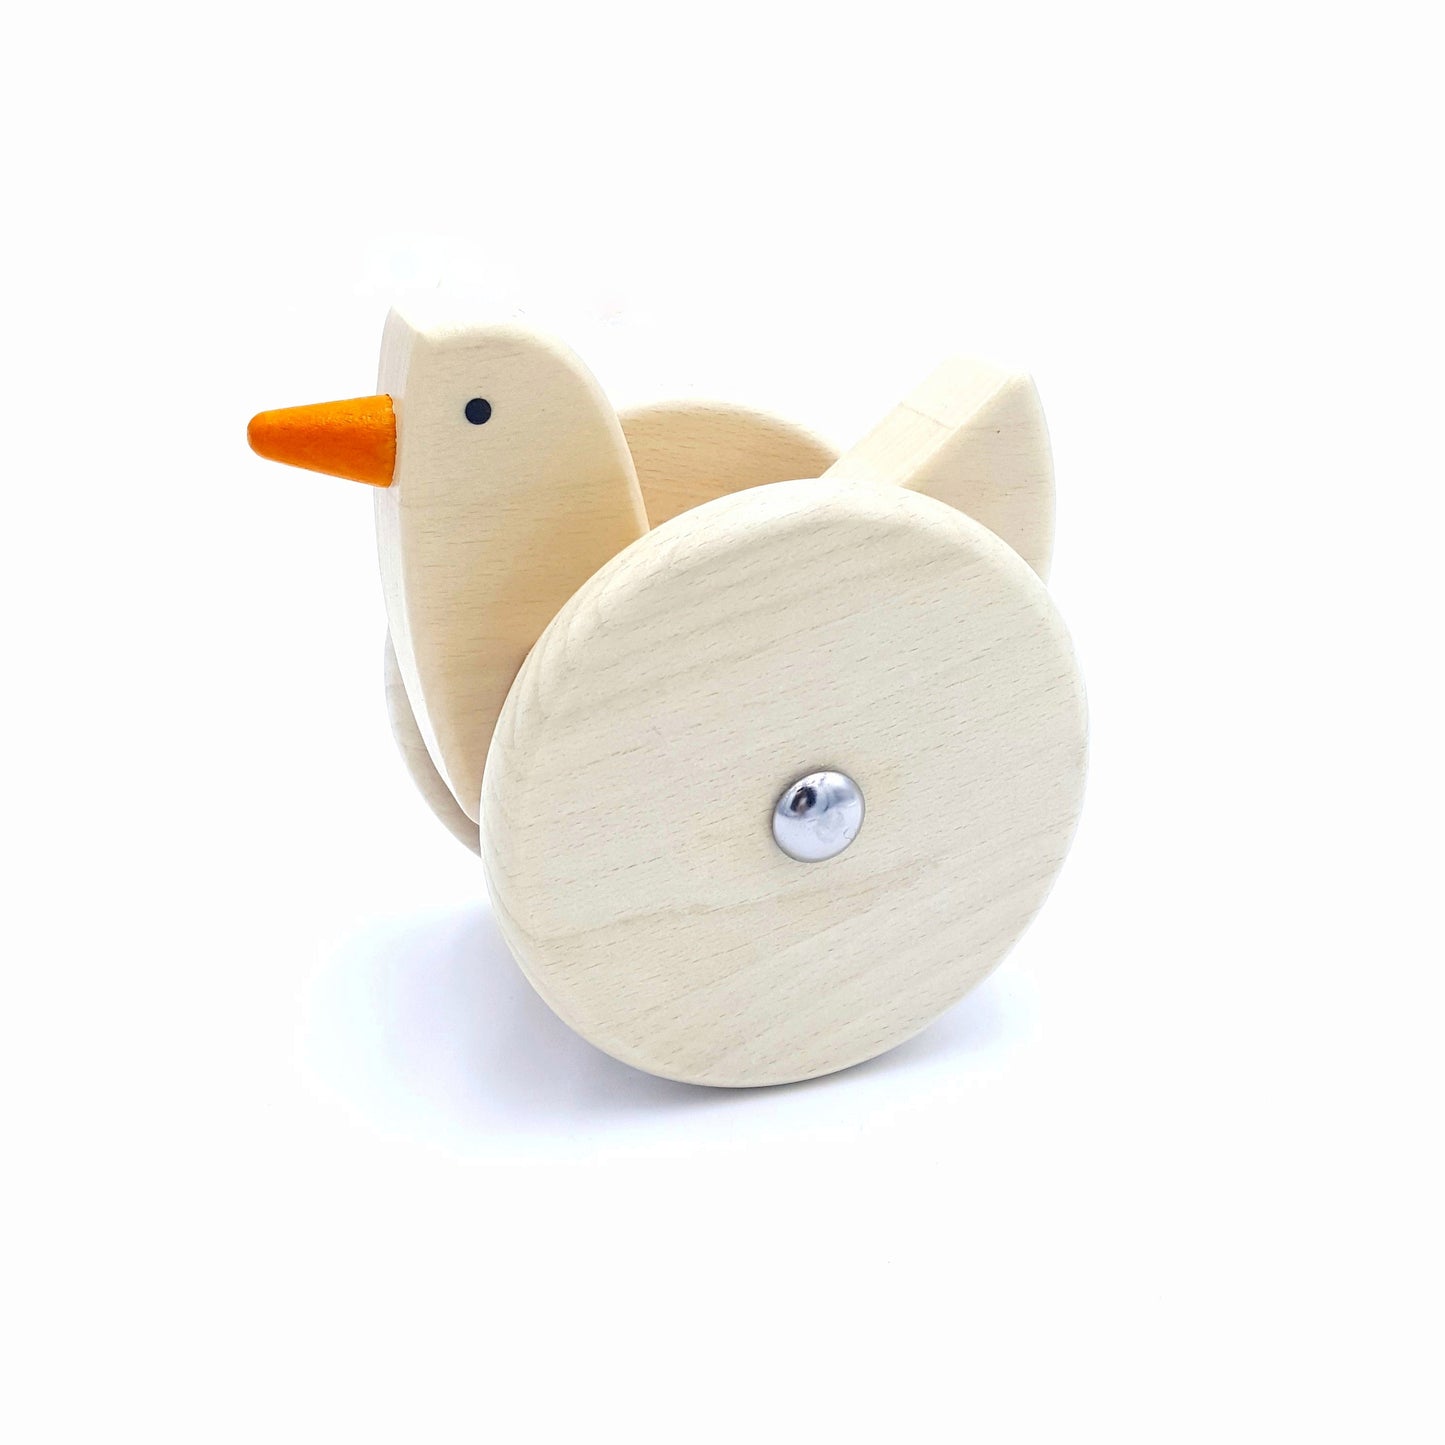 Wobbly Chicken Push Toy